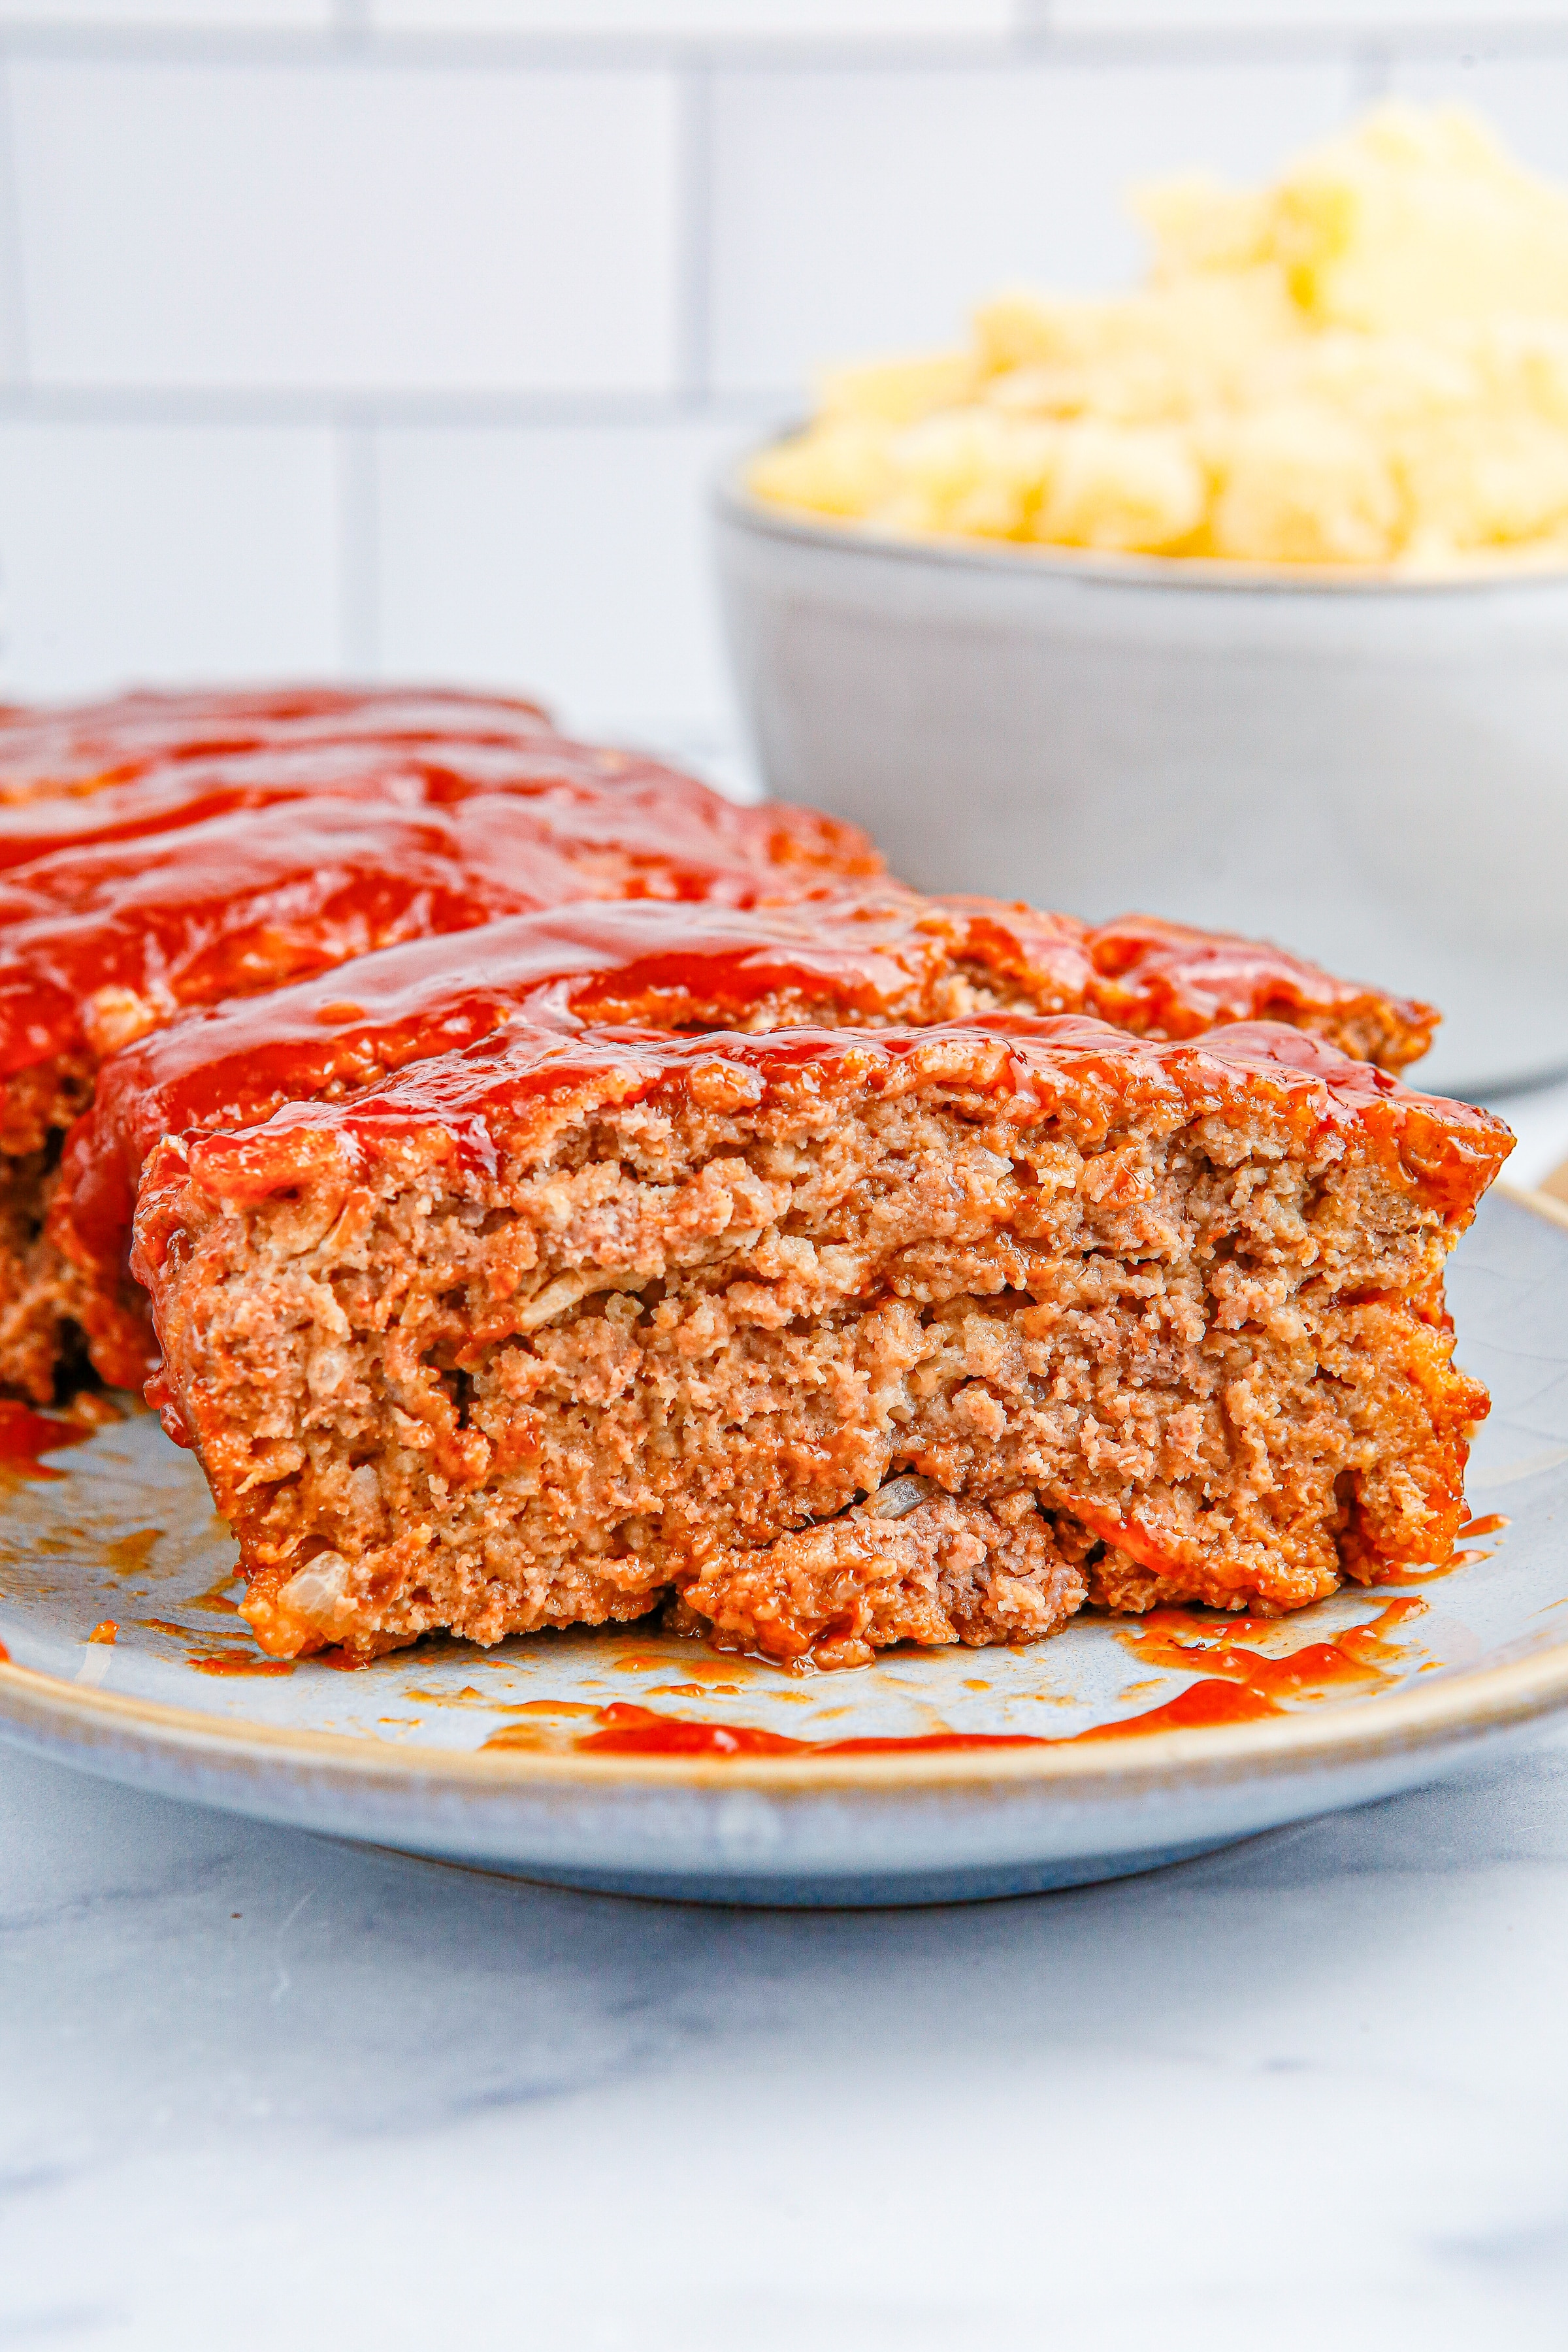 Slices of meatloaf with tomato sauce glaze on a white serving platter.